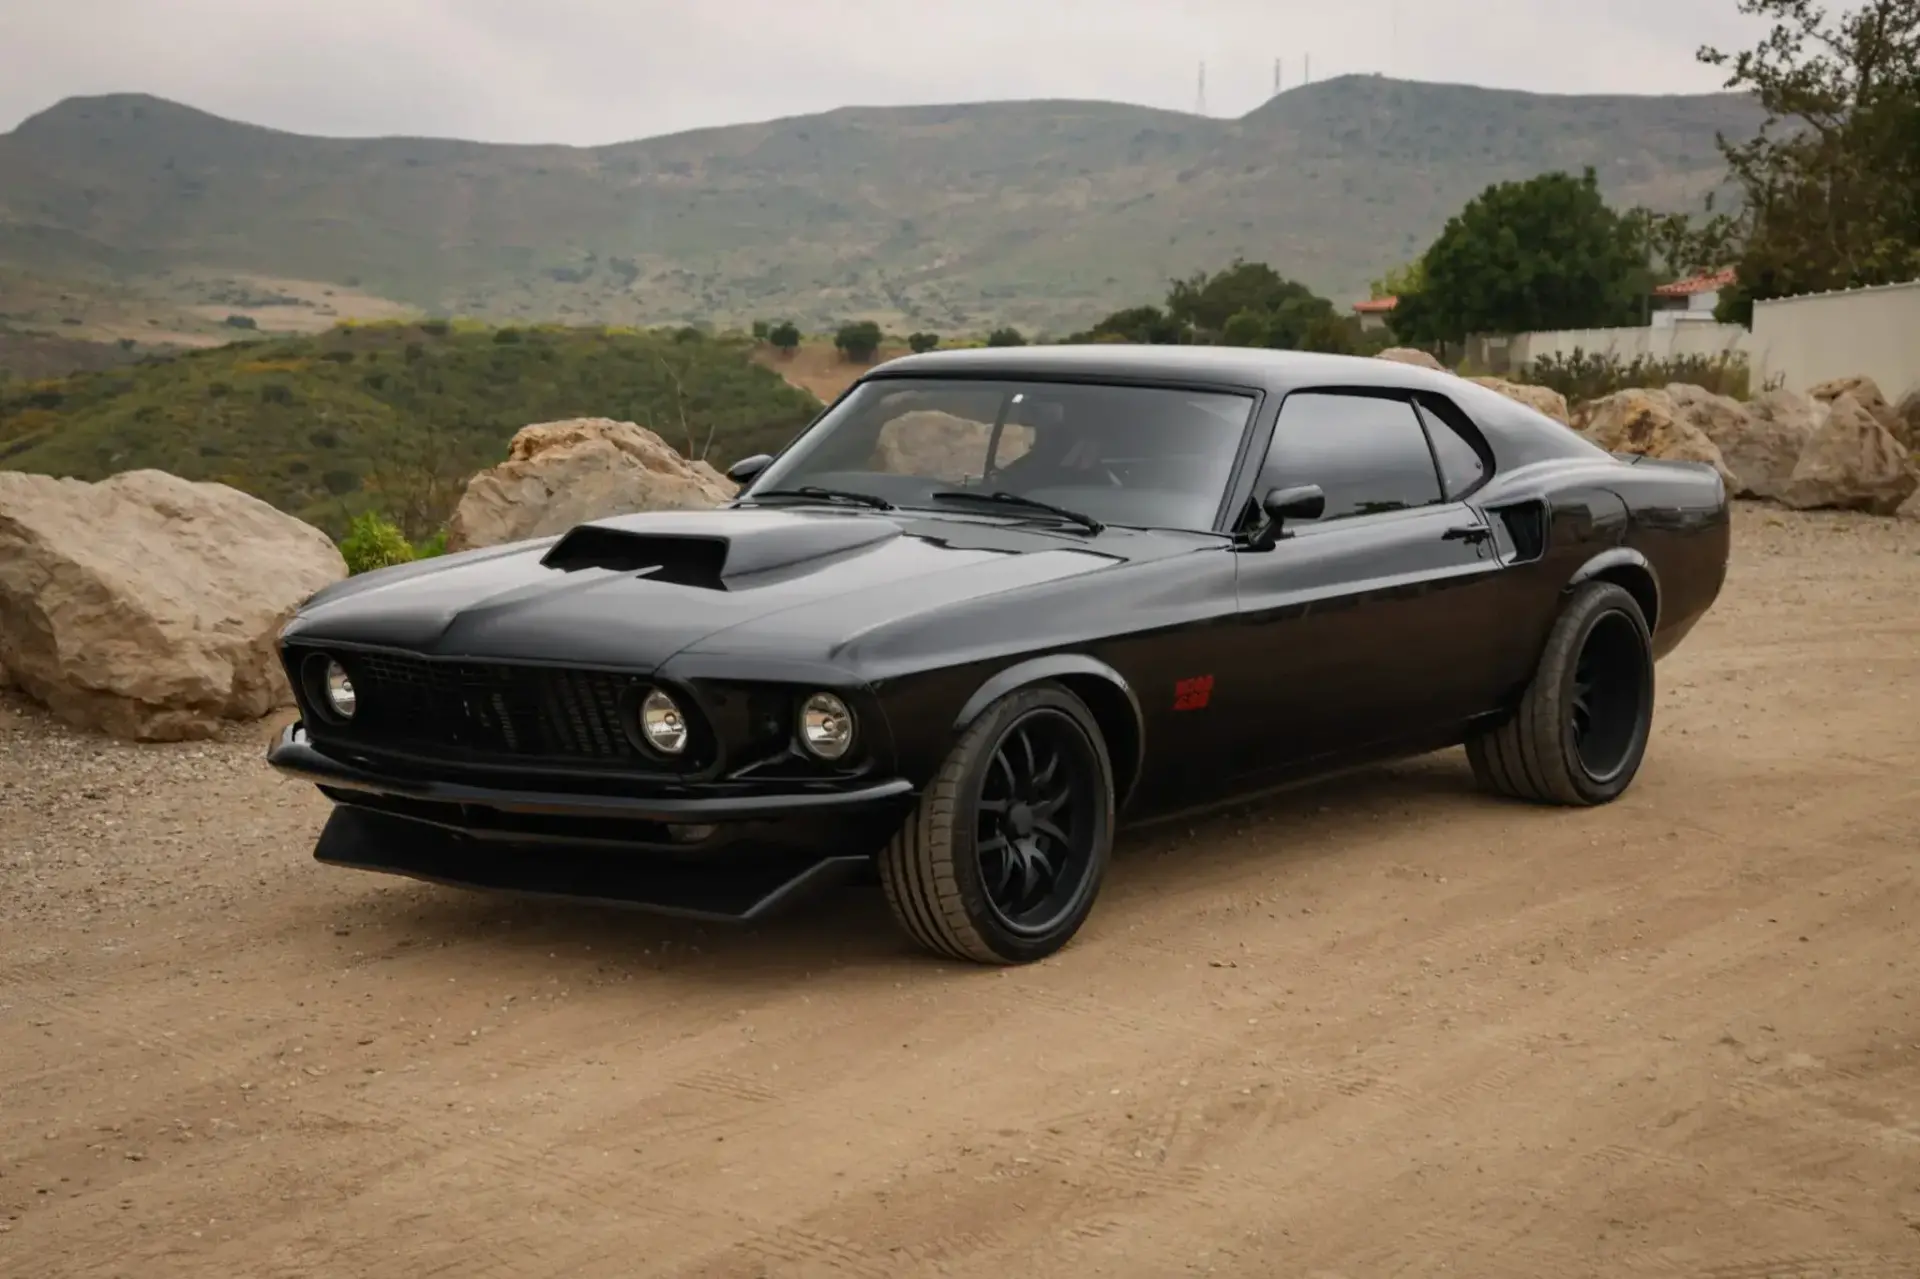 Kaase 572 powered 1969 ford mustang boss 429 up for auction on bring a trailer 2 1